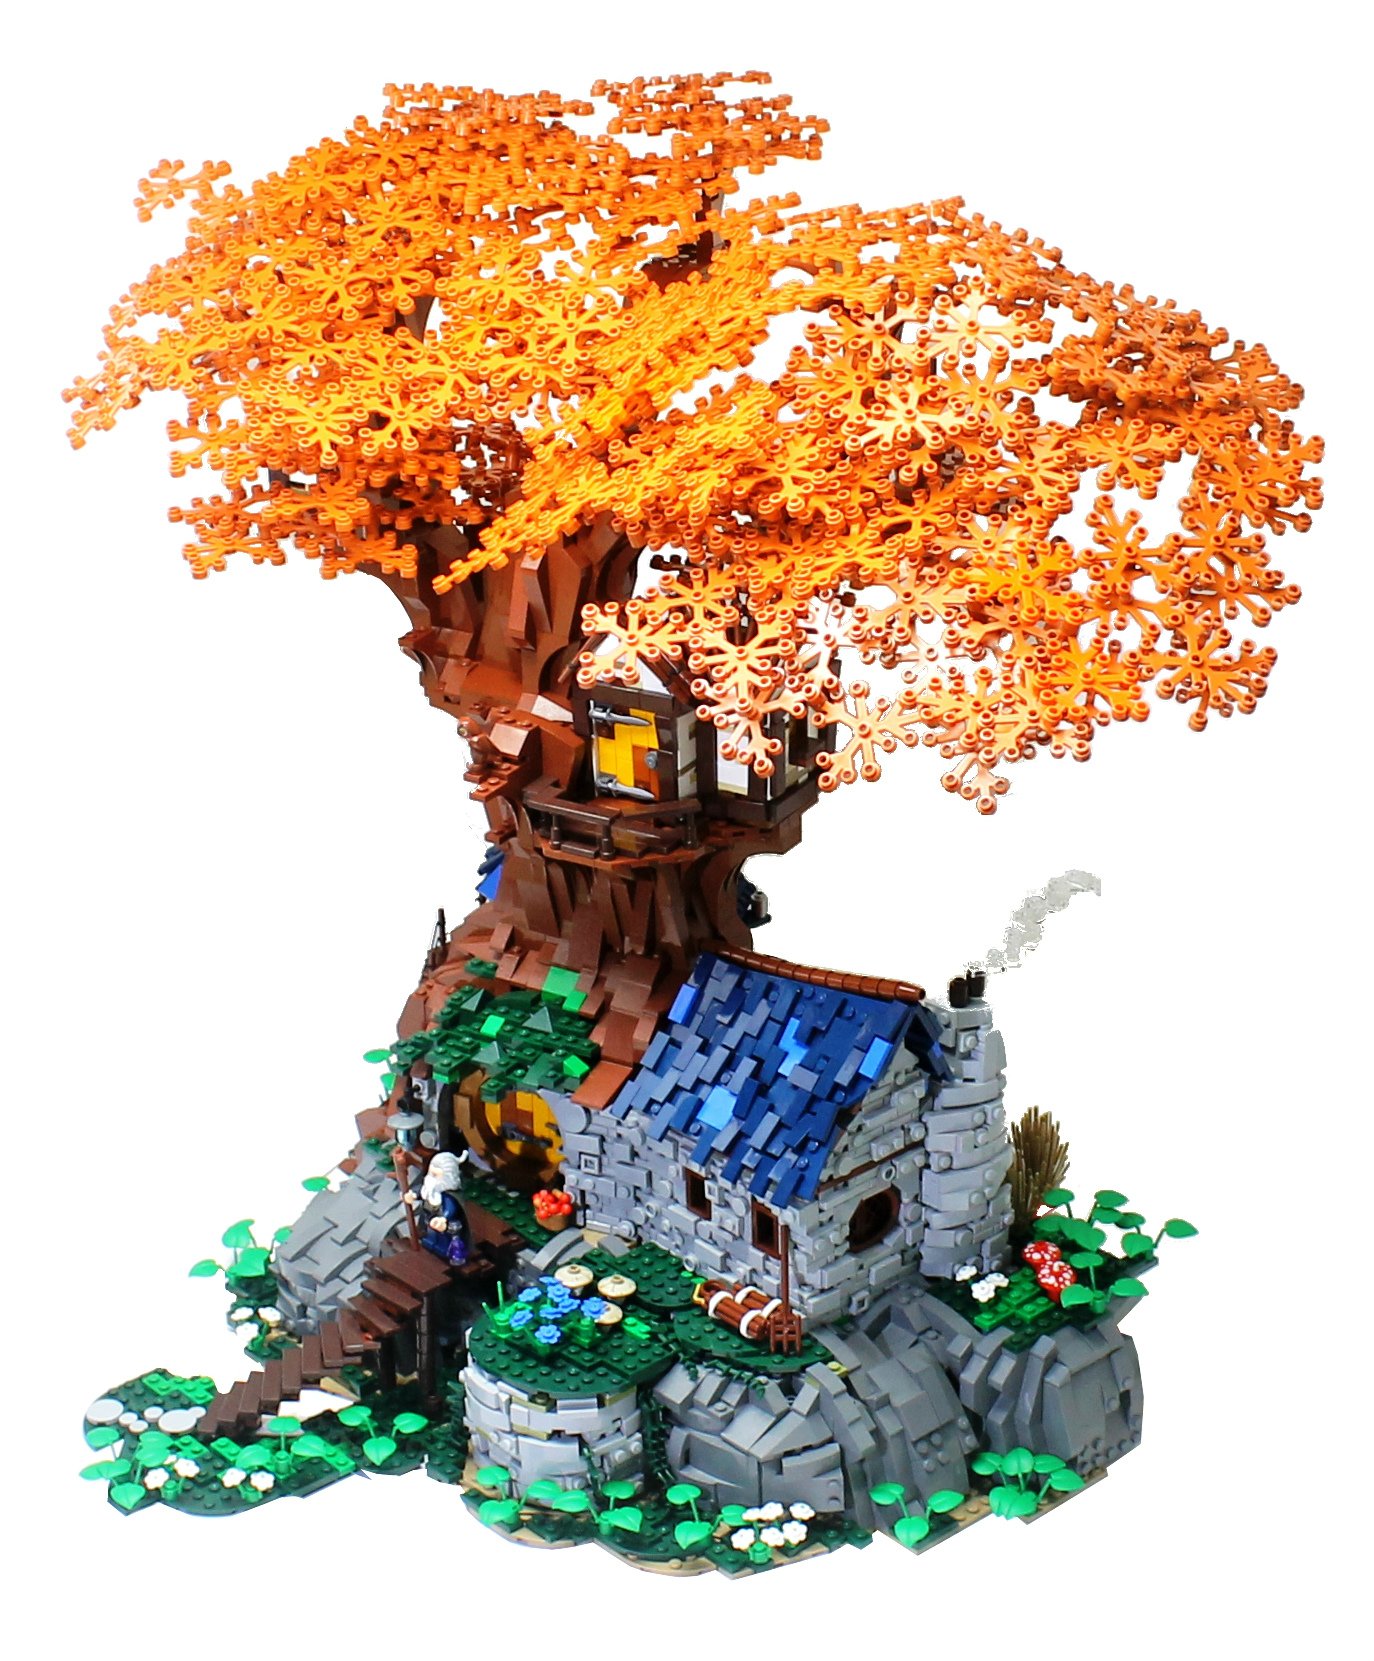 GiocoVisione on Twitter: "Thoryn Arper Tree House by César #TreeHouse in #Fantasy Style #LEGO #MOC More on https://t.co/rGI5coevLW https://t.co/3vLUYVS17P" / Twitter